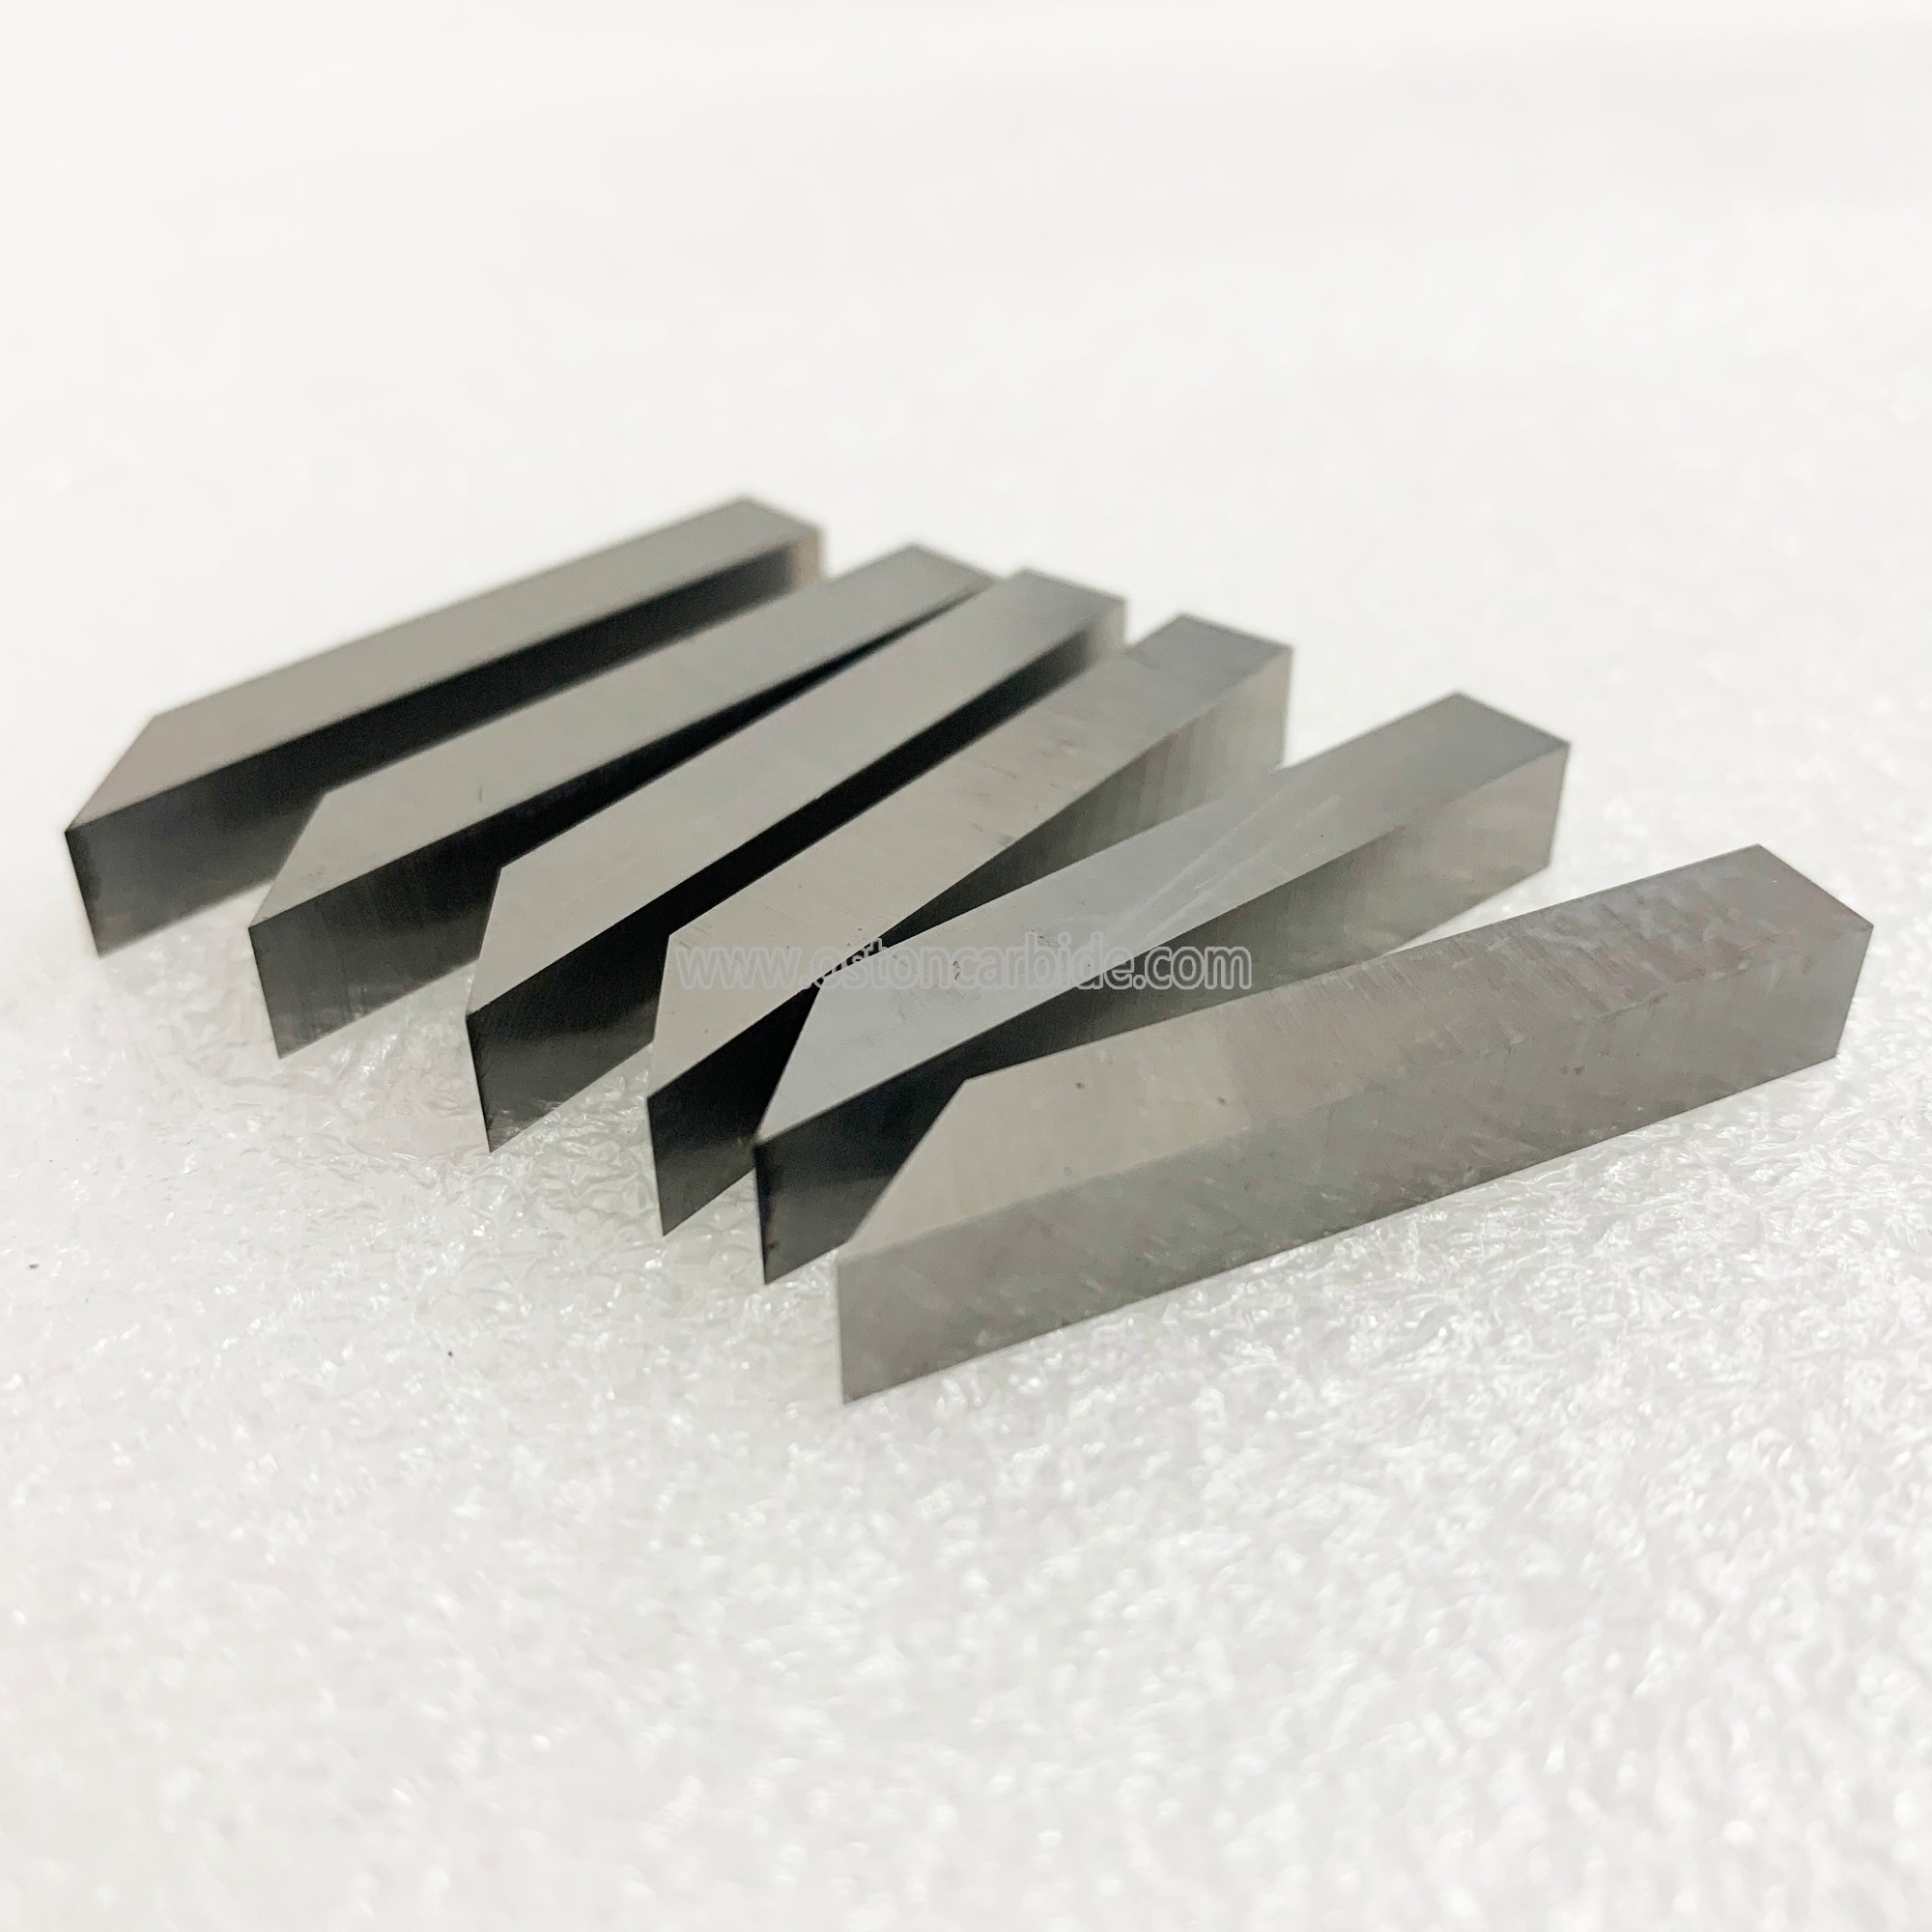 K10 Solid Carbide Strip Cutter for Leather Cutting 